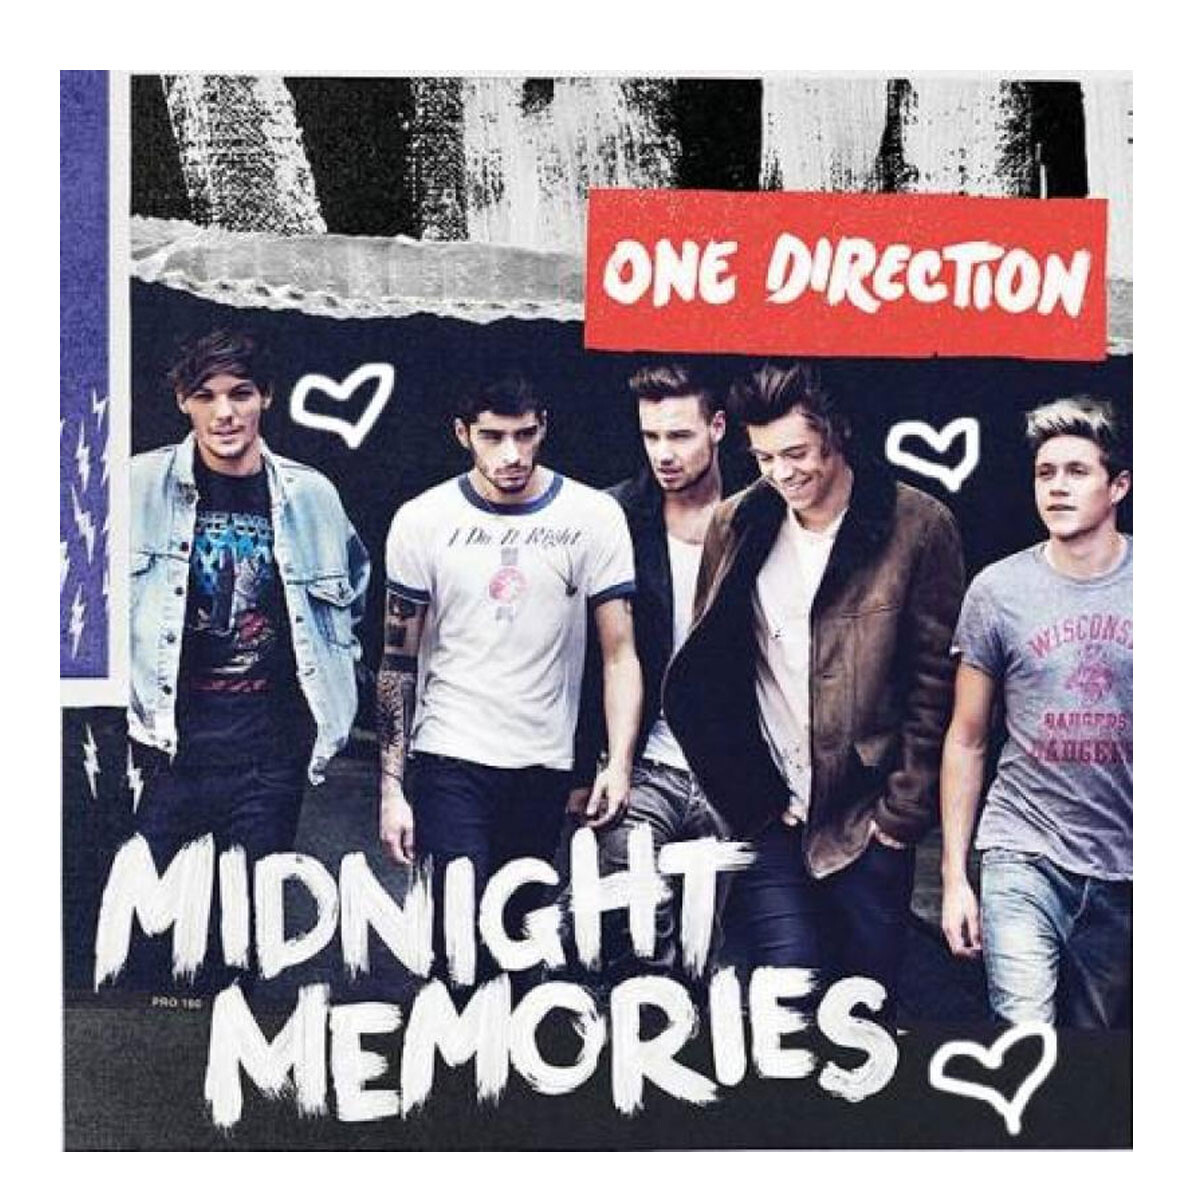 One Direction - Midnight Memories - Cd 